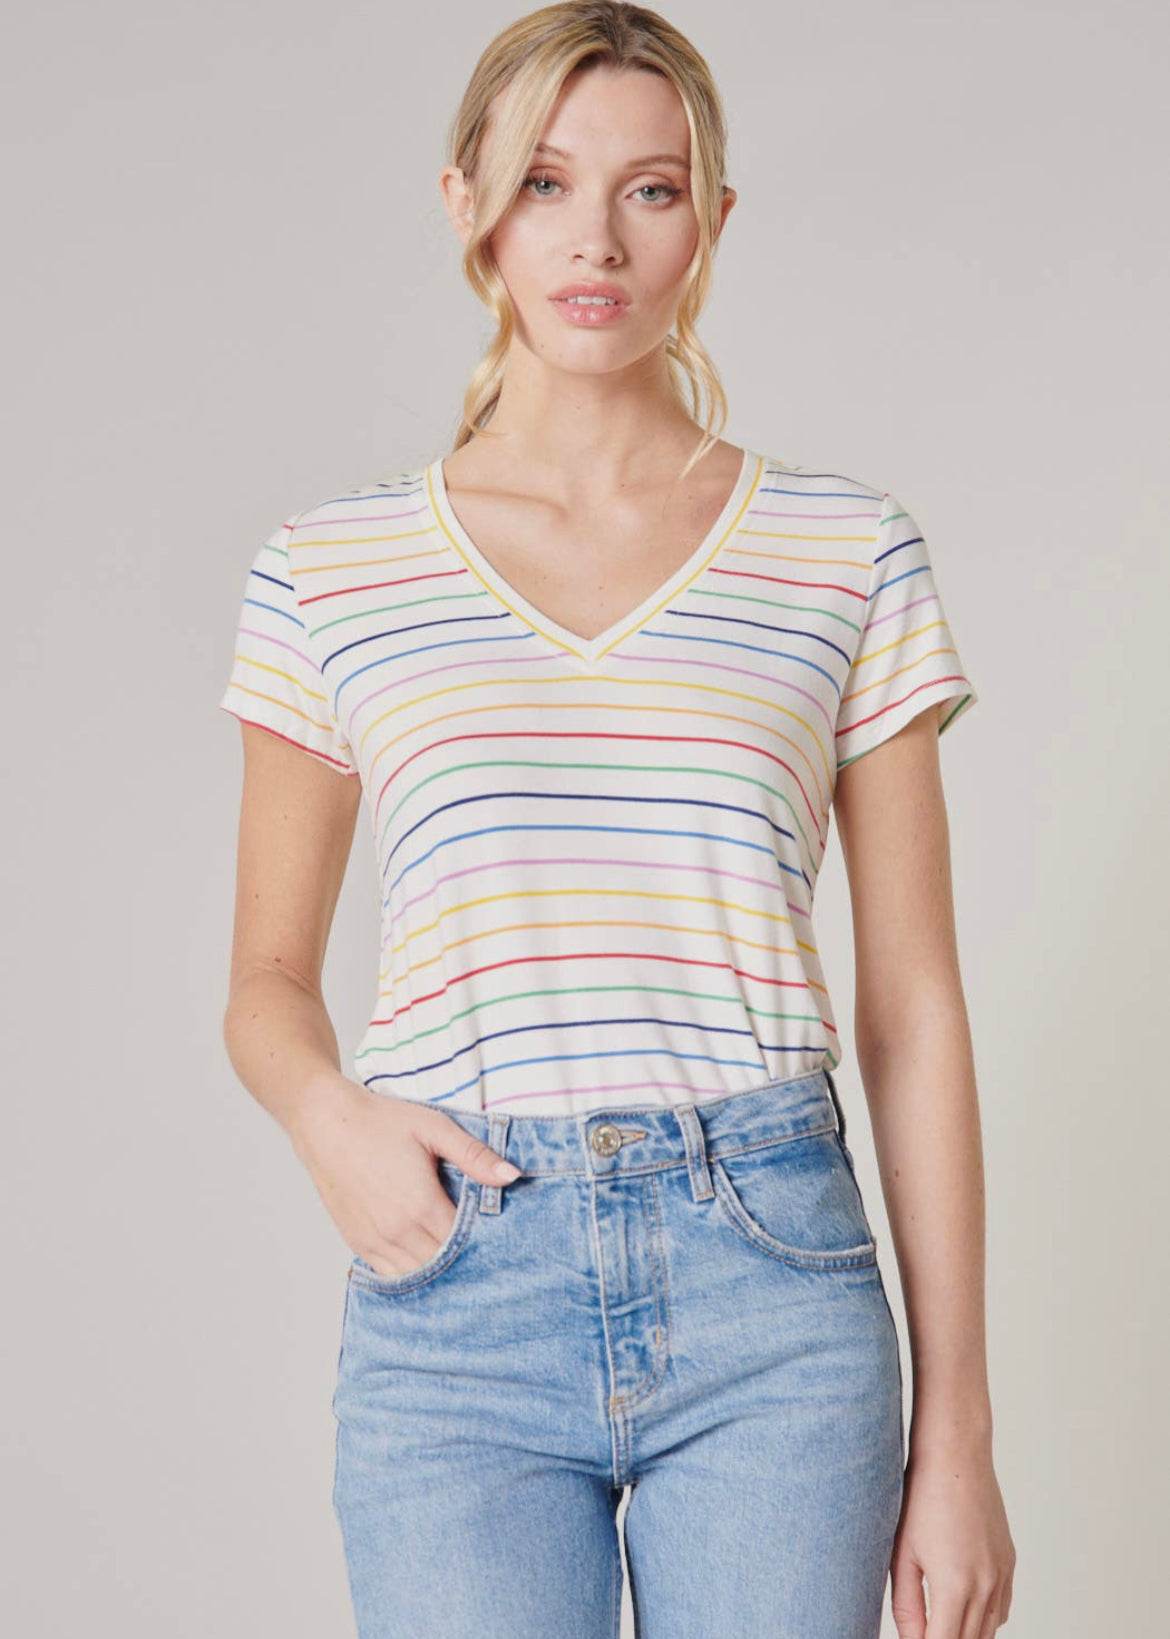 Your Favorite Rainbow Knit Tee